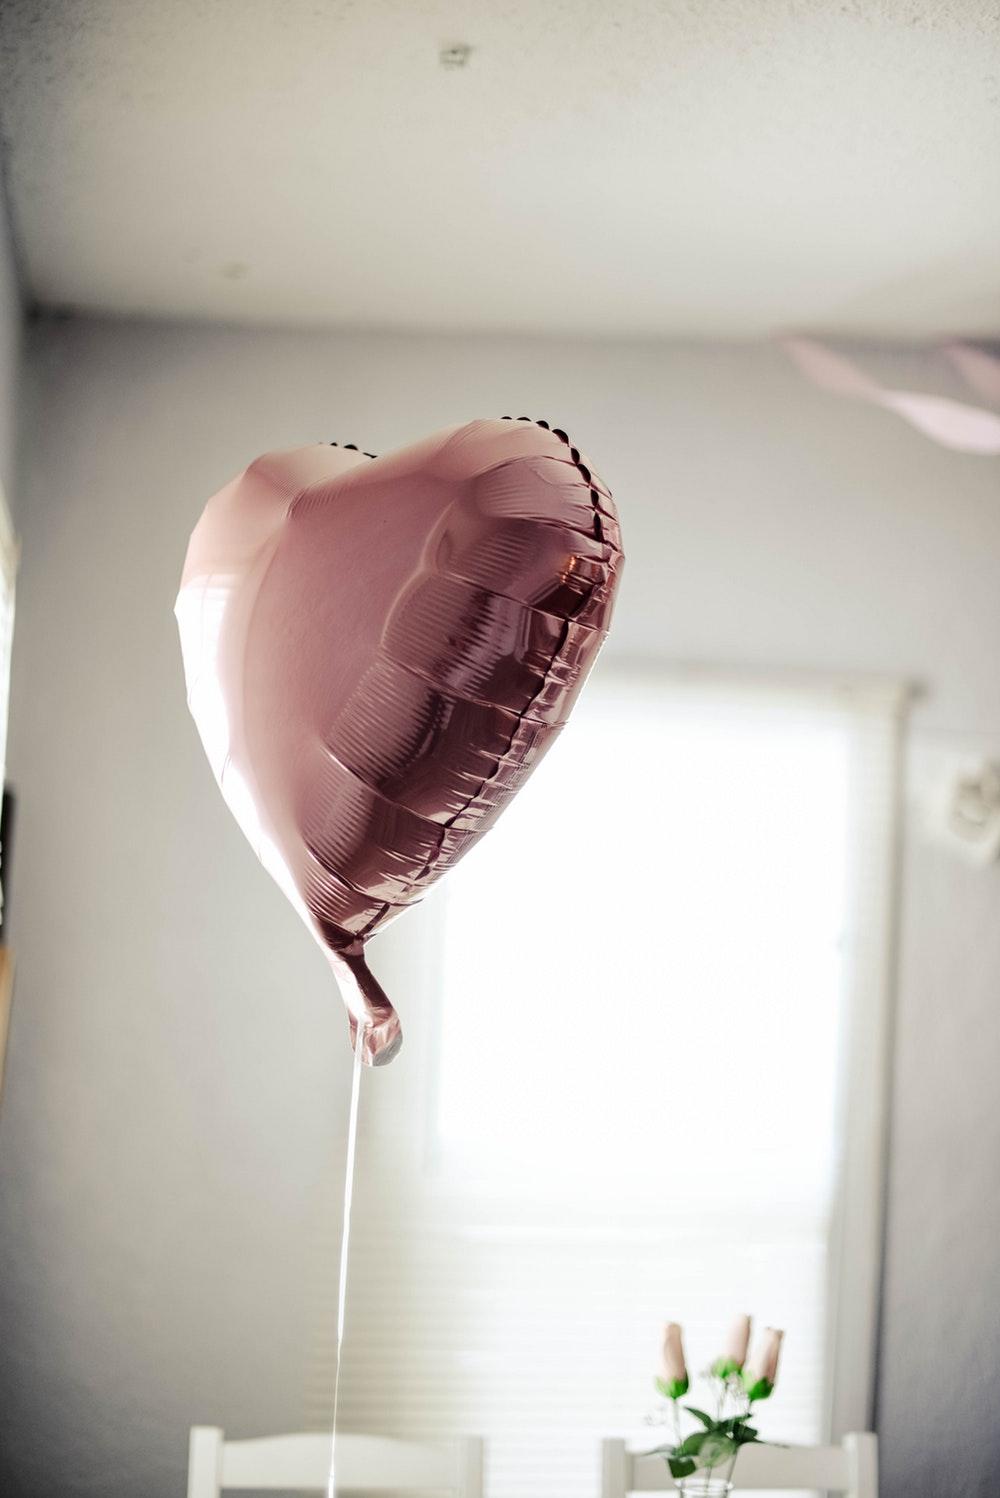 Helium Picture. Download Free Image